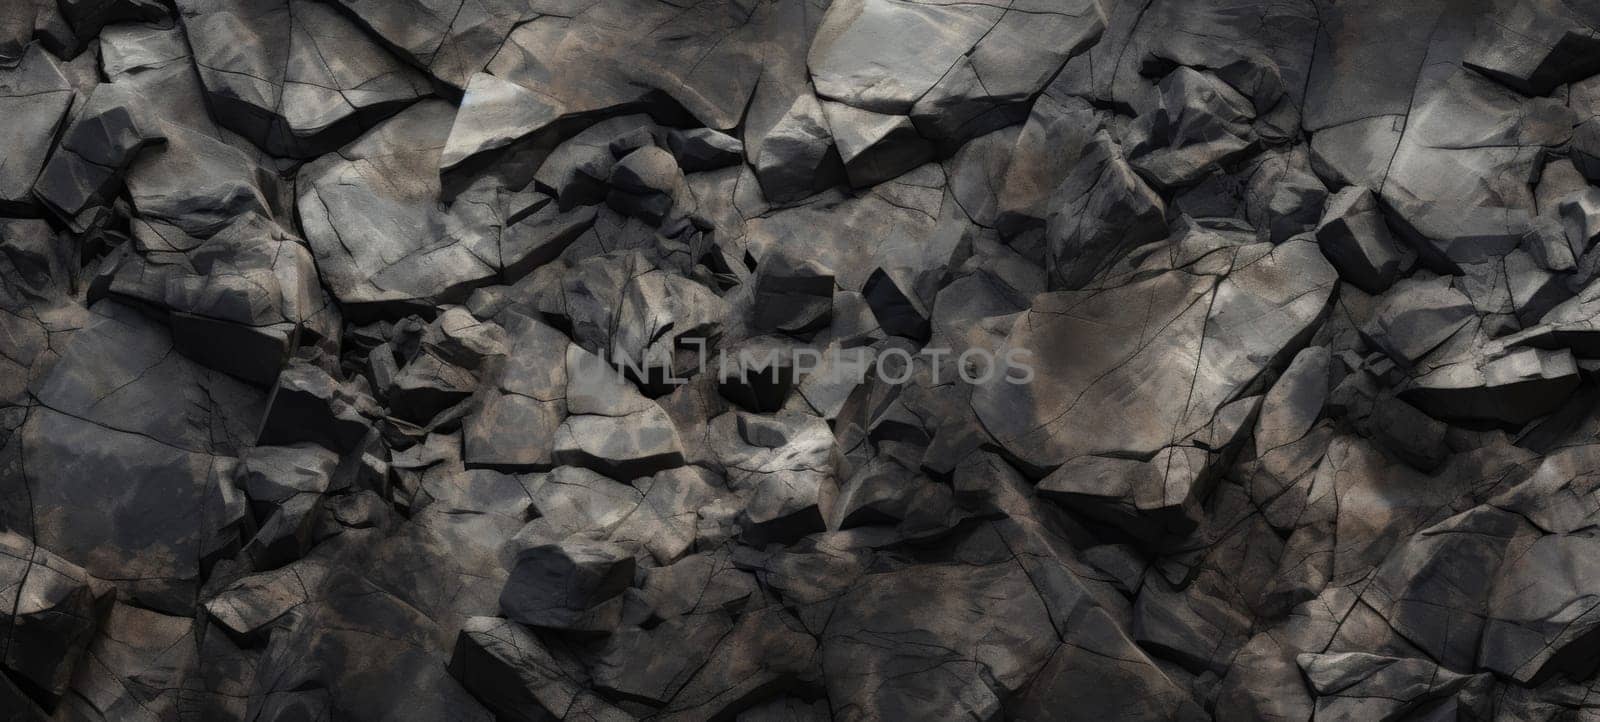 A detailed close-up shot of a dark rock surface showcasing various textures and shades.